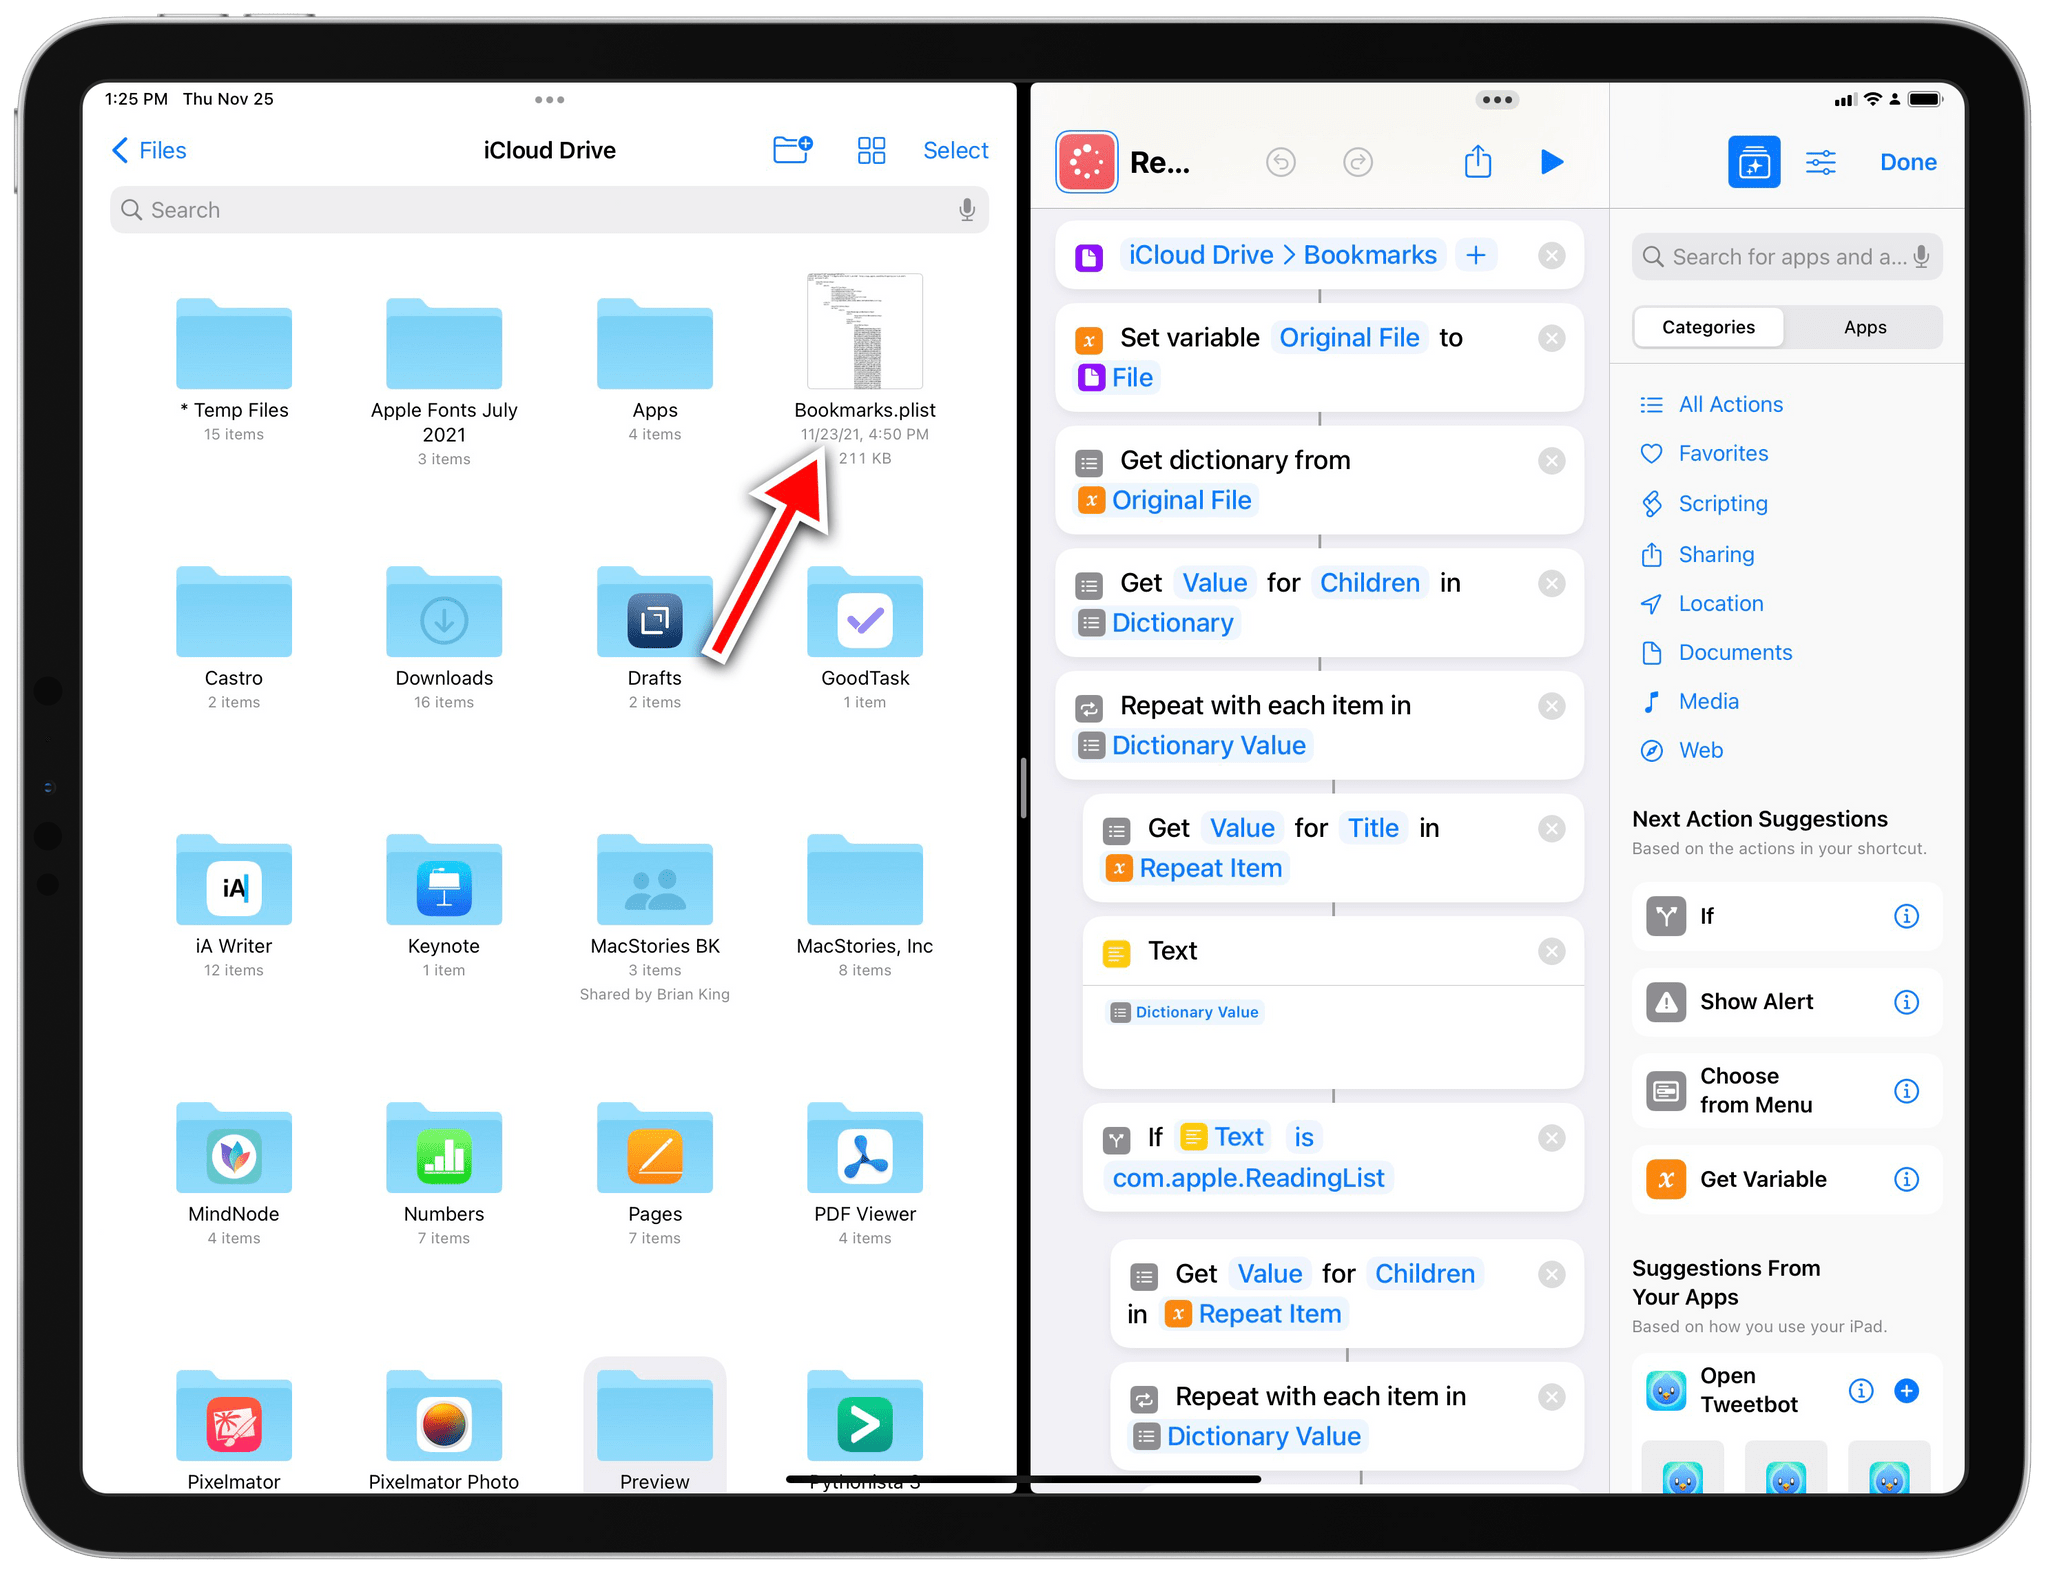 If you want to run this shortcut on iOS or iPadOS, you'll have to manually copy the Bookmarks.plist file to iCloud Drive first.